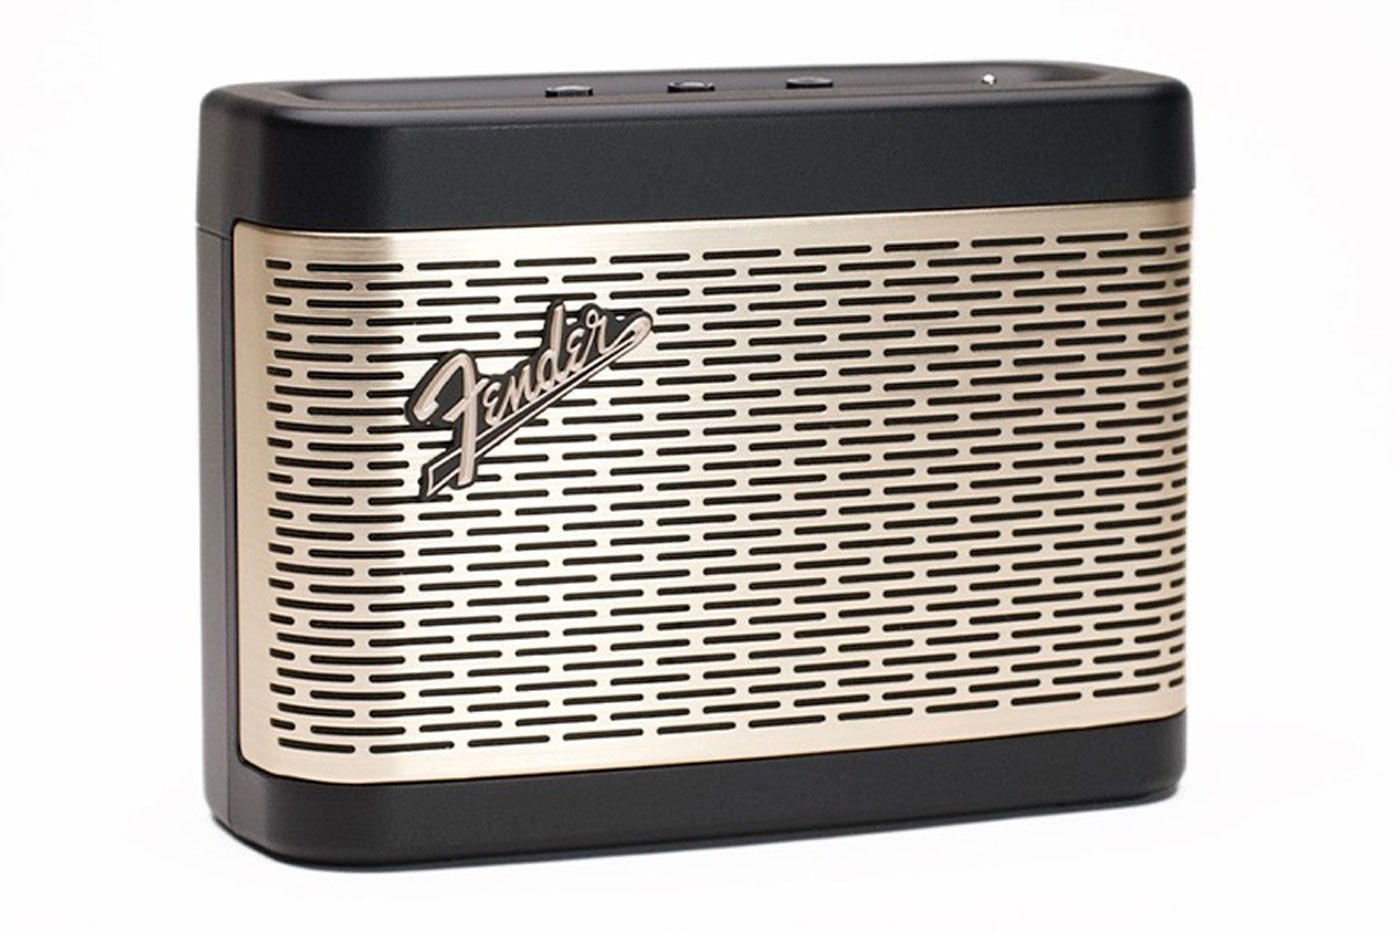 Fender Introduces Newport 2 Portable Bluetooth Speakers asia BT 5.0 party mode silverface guitar amp release info date price